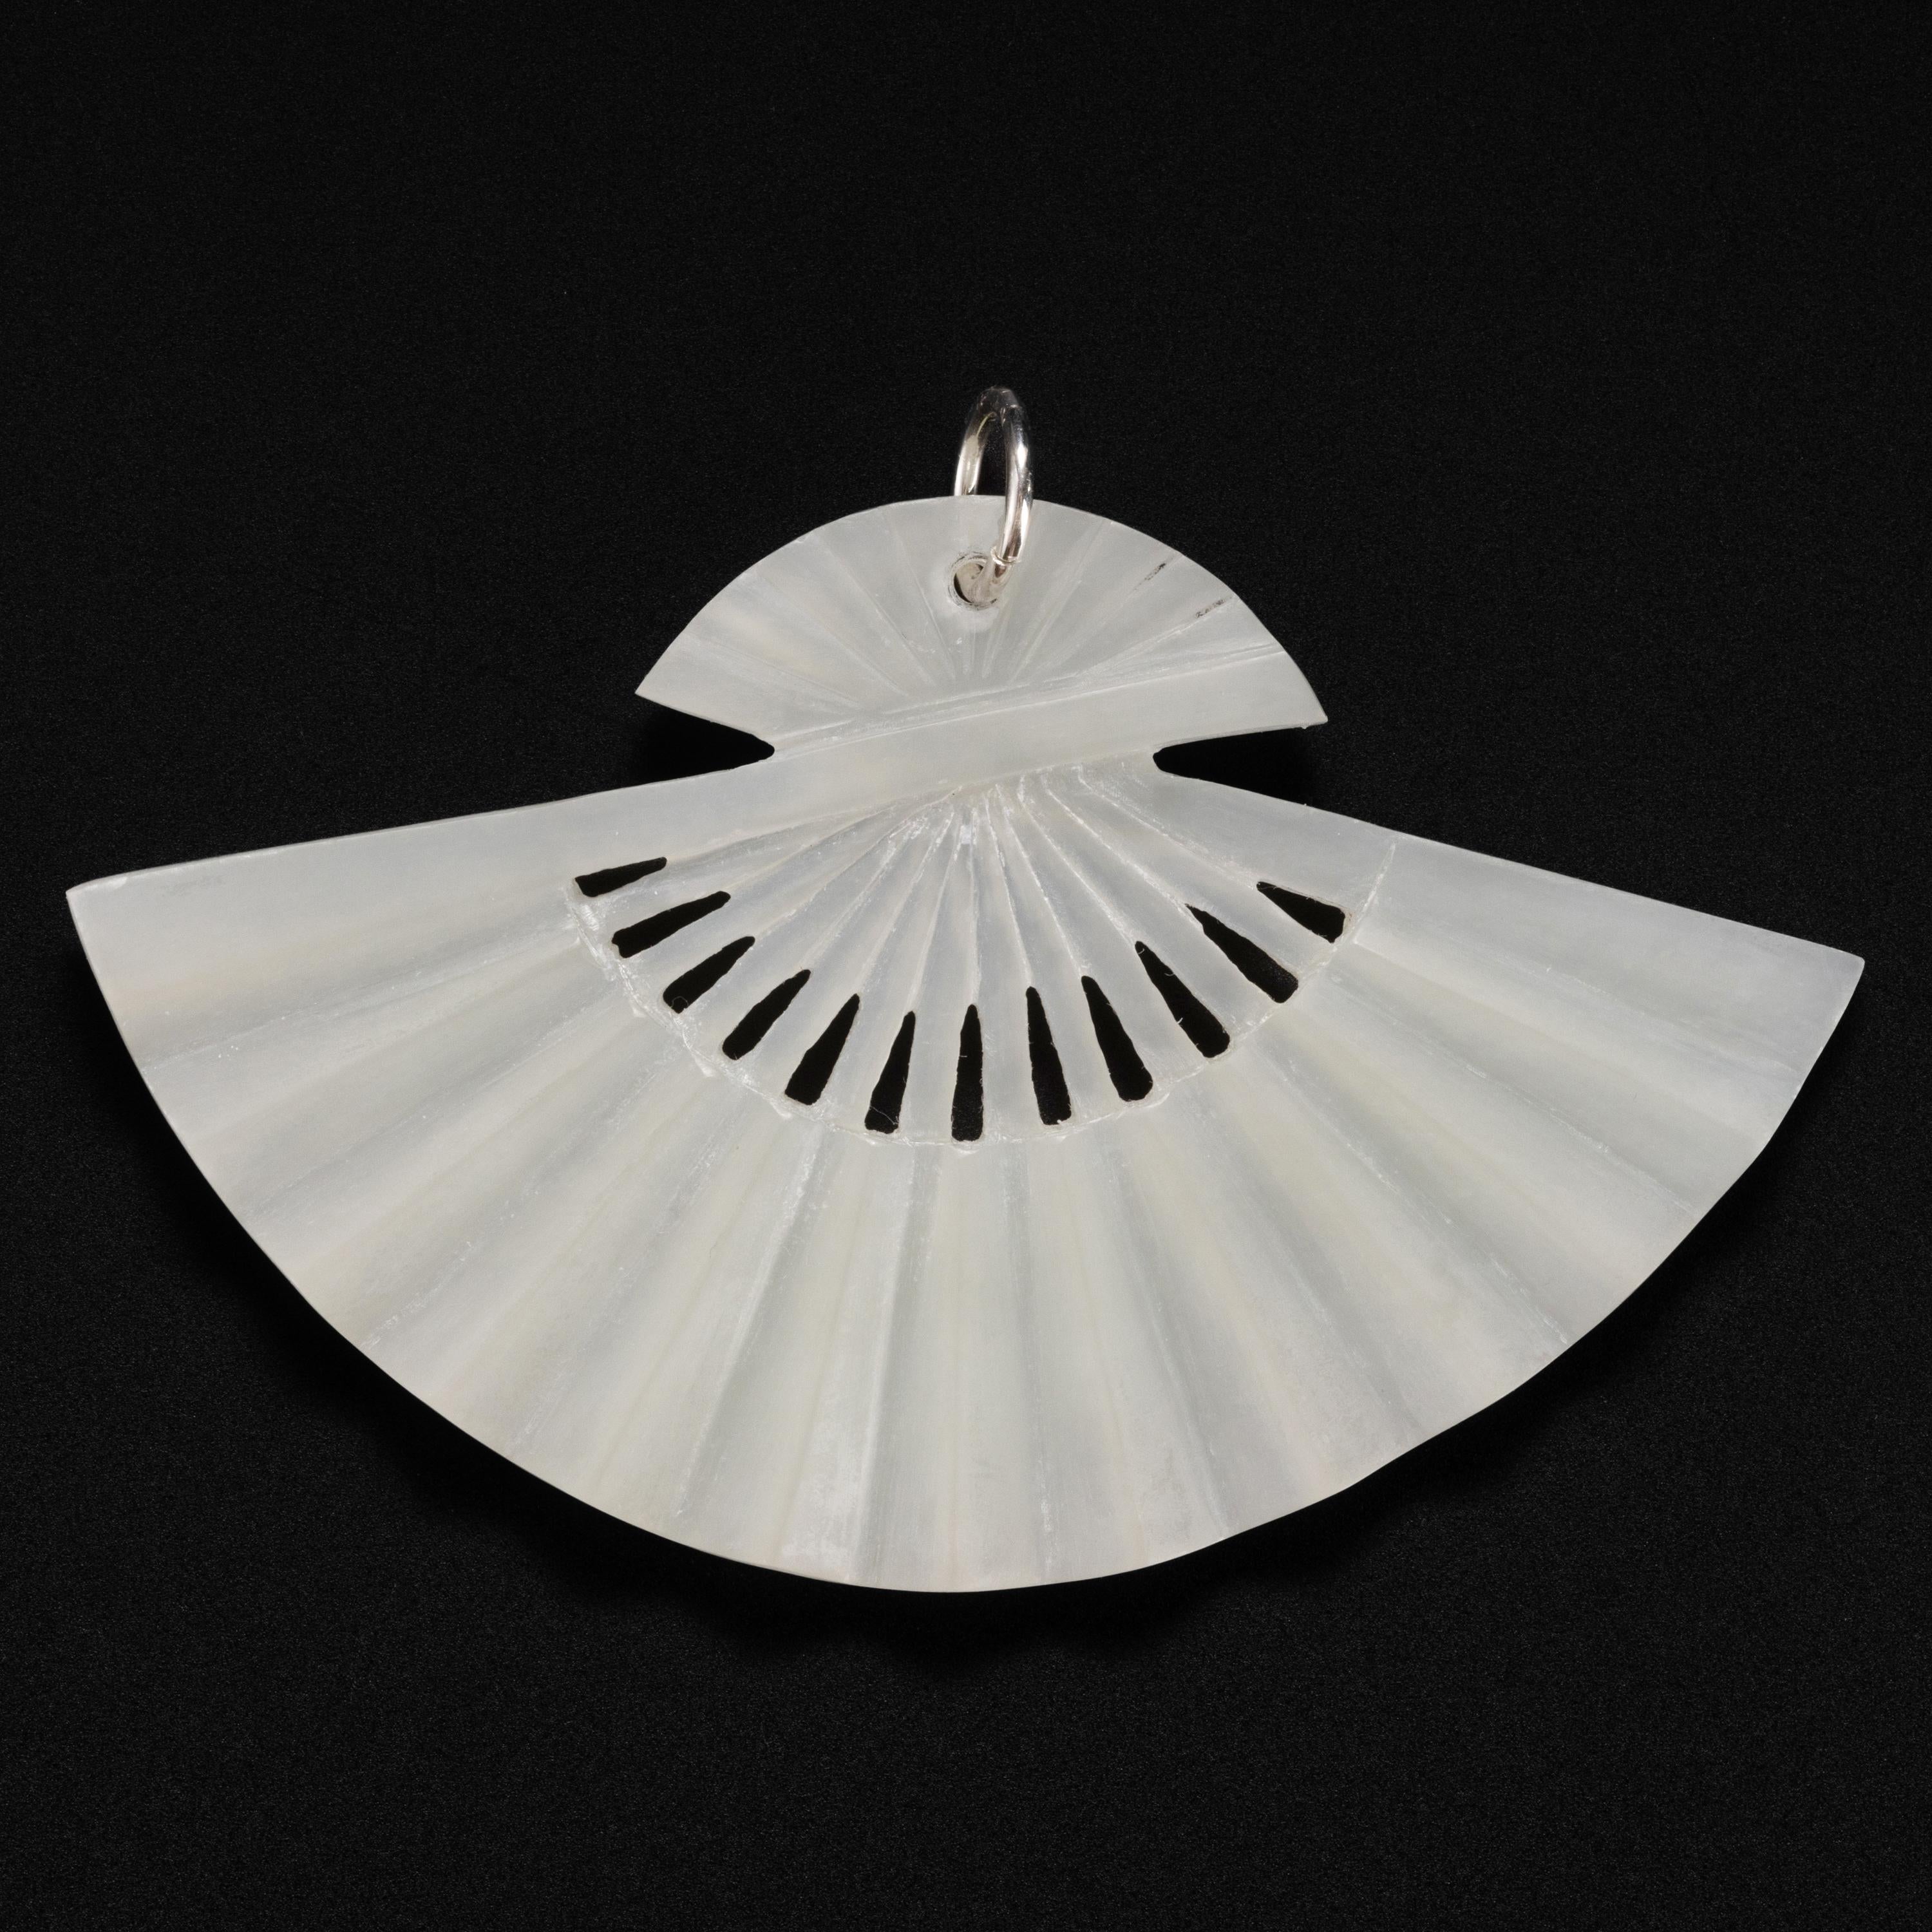 An absolutely stunning, highly translucent white nephrite jade (mutton fat) hand-carved pendant. The 89.71 x 54.77mm pendant has been carved by a master lapidary artist to depict a folding paper fan. It's a wonderful and original idea; I've never